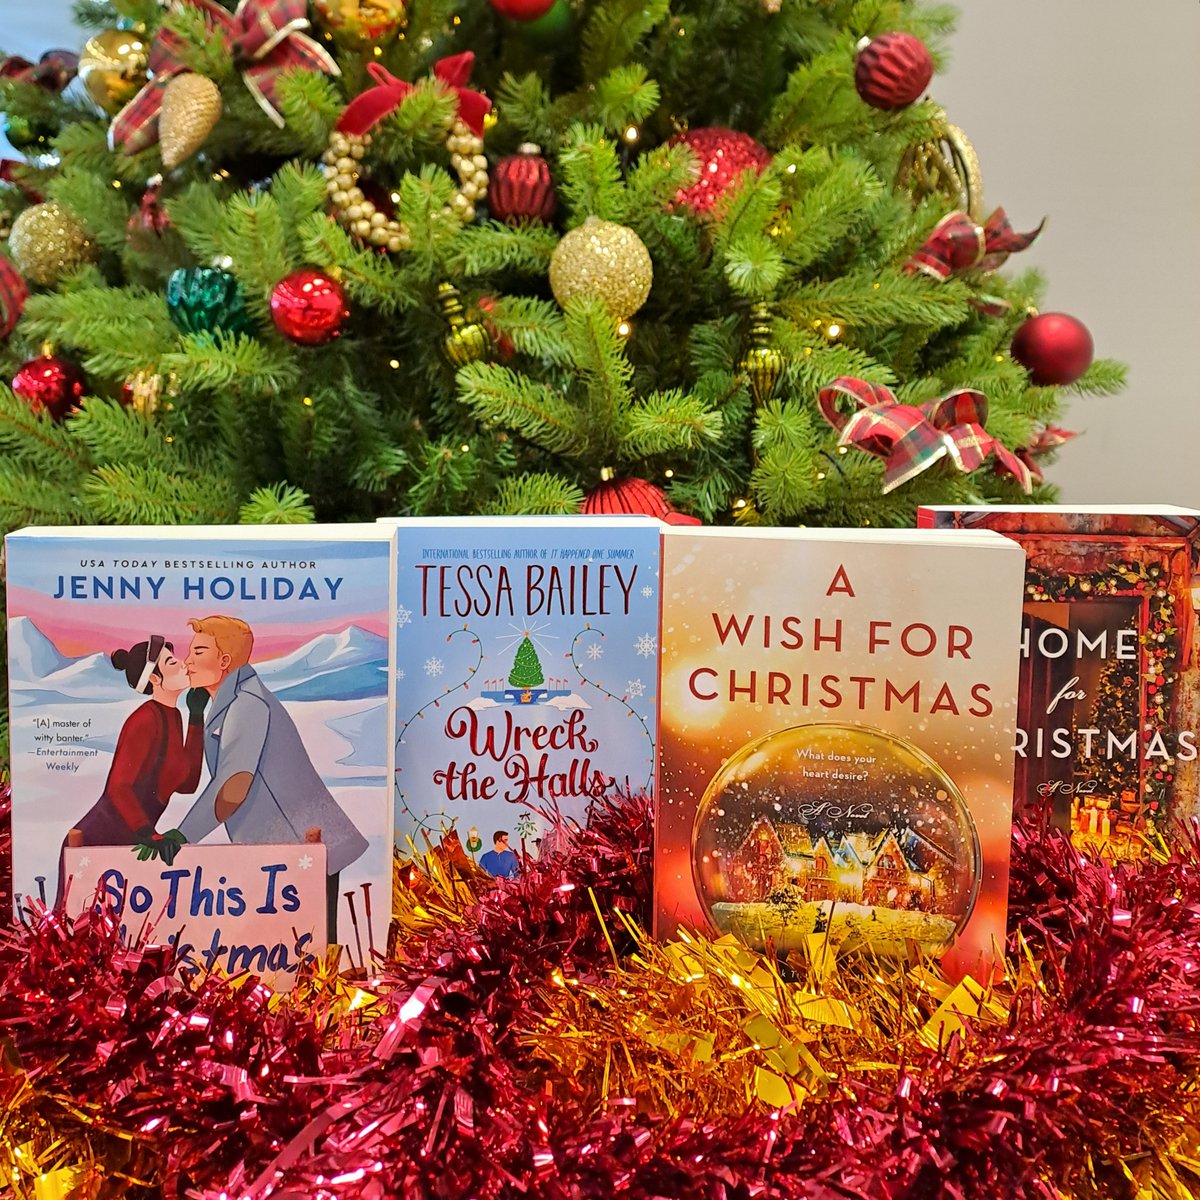 Day 2 of our Countdown to Christmas is filled with heartwarming Christmas rom-coms. 📚❤️ To Enter: Like, Retweet, and Follow! Comment with your go-to Christmas movie 🎥 Ending at 6 pm UK and Ireland Only! #Harper360Christmas 🎁✨ @Harper360YA